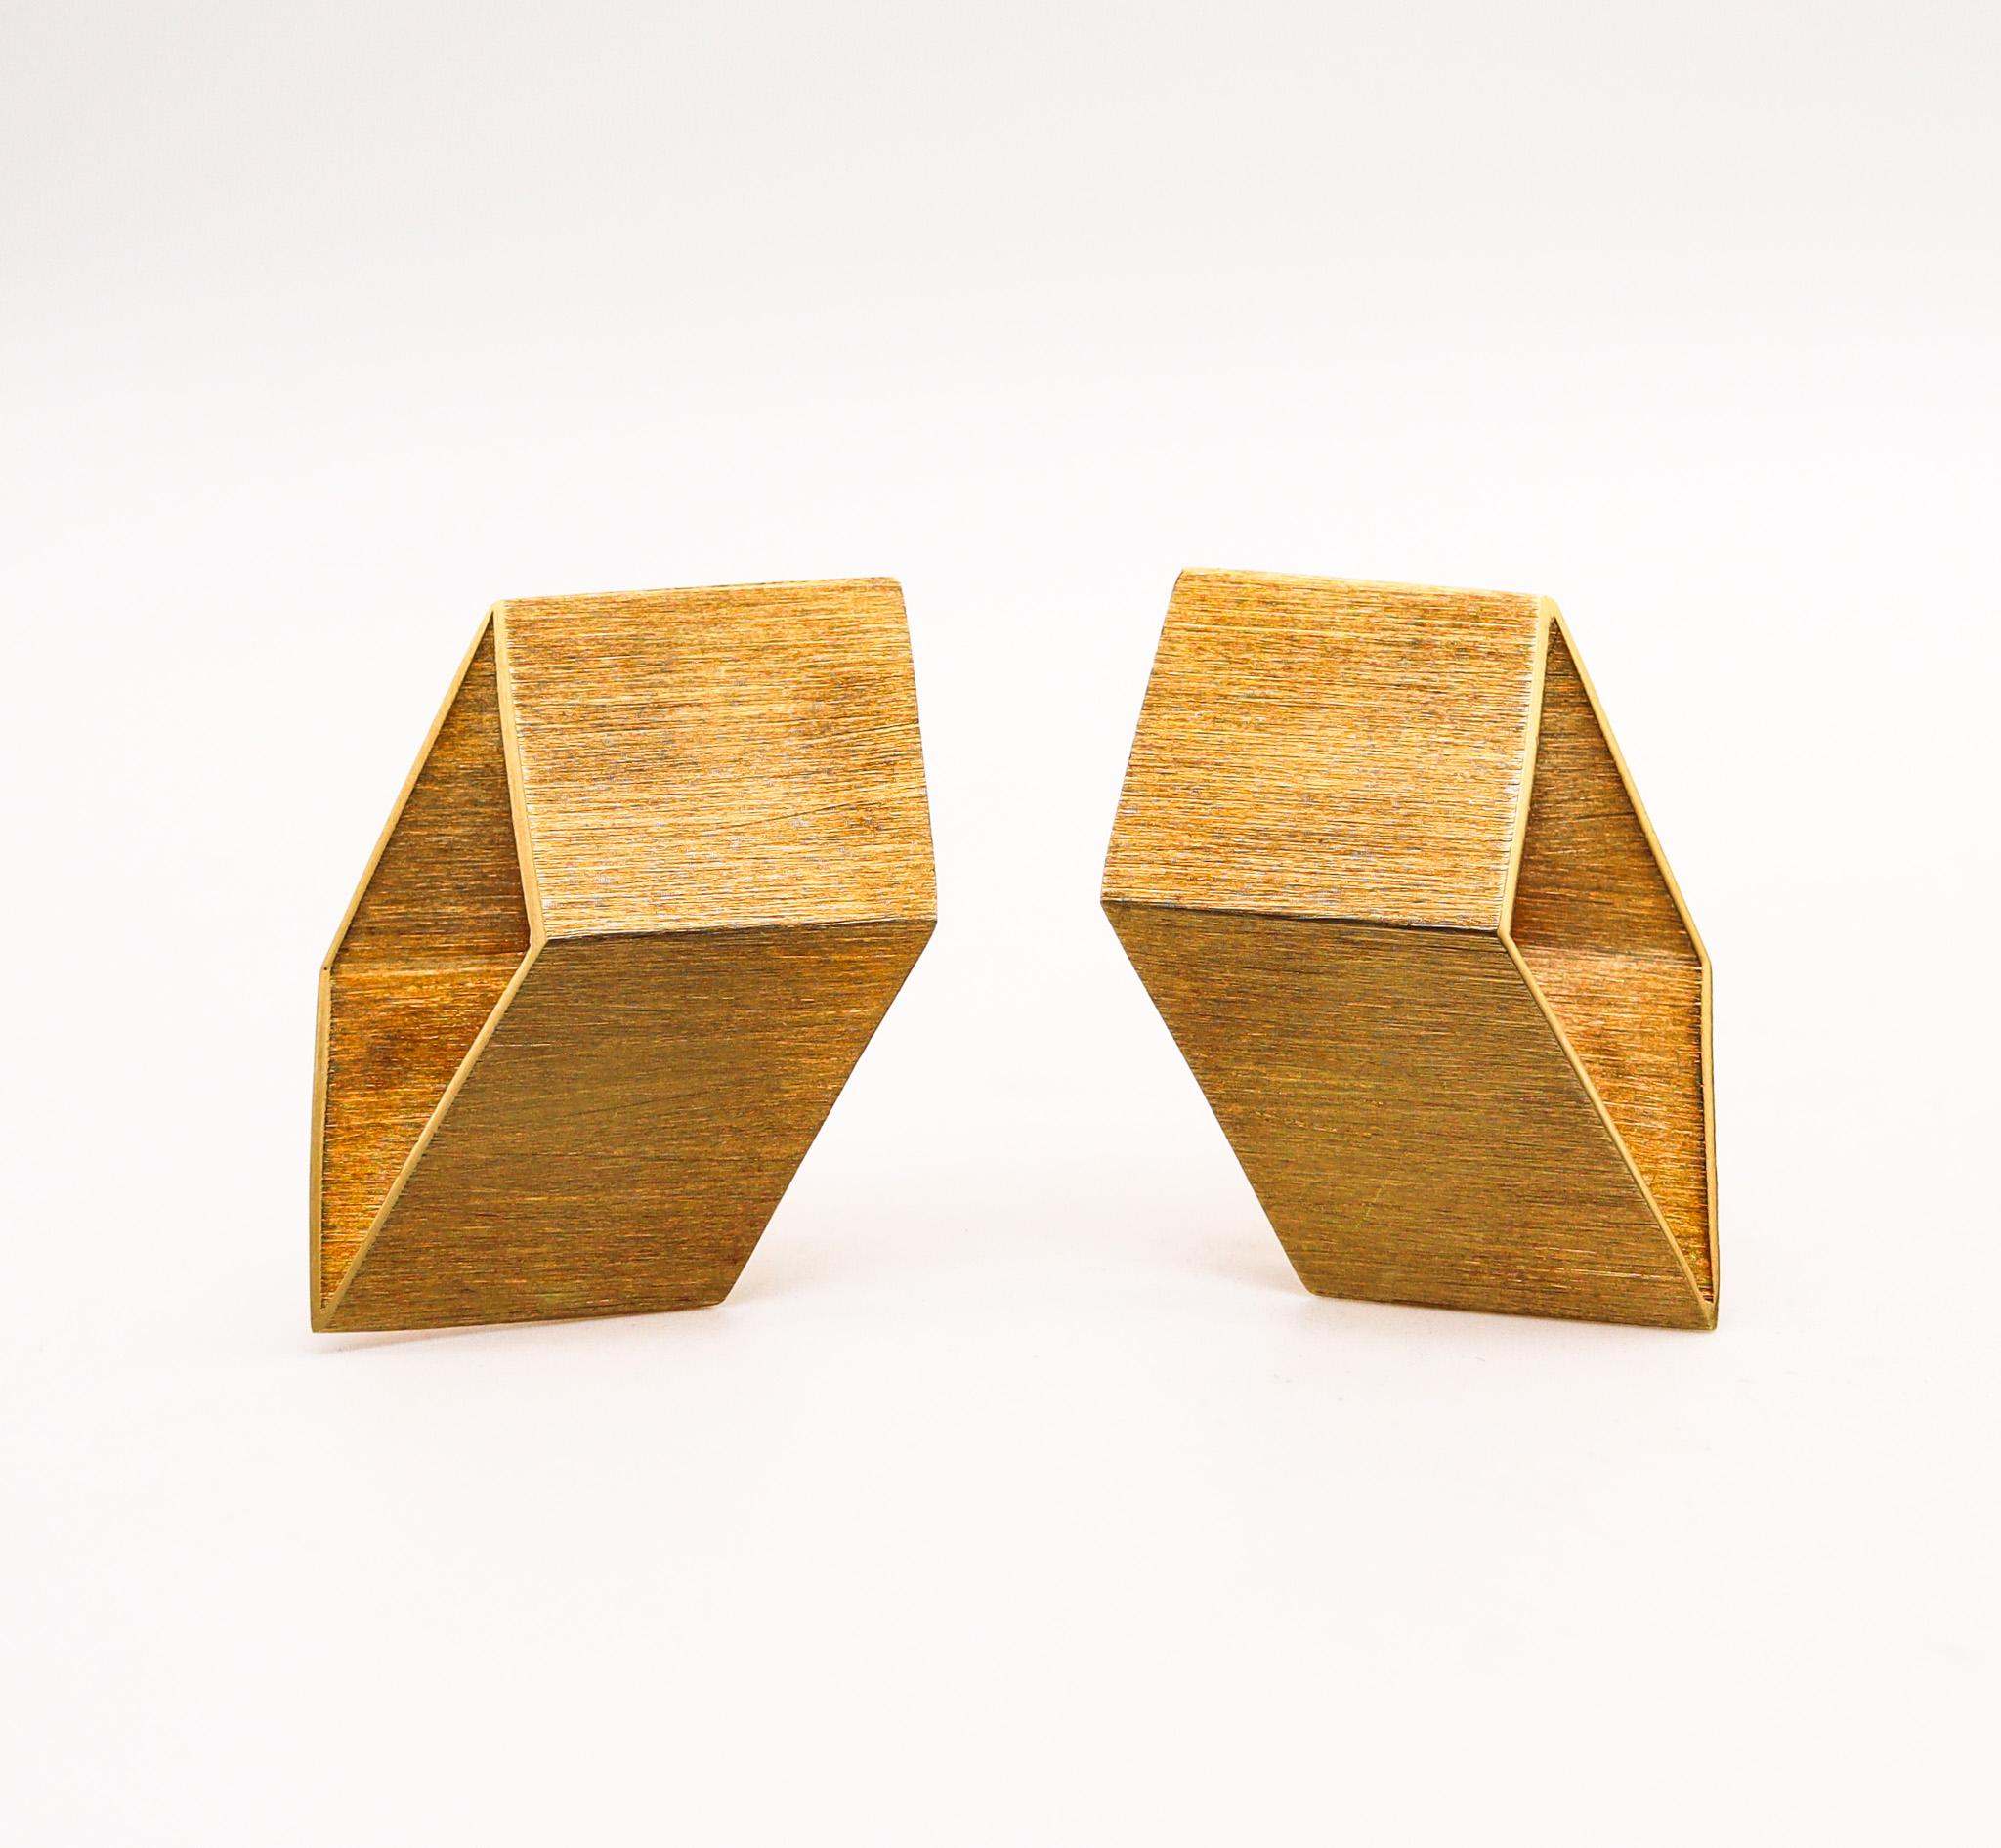 Geometric earrings designed by Giampaolo Babetto (1947-).

Beautiful geometric ear clips in three dimensions, created by the Italian artist Giampaolo Babetto, back in the 1984. These sculptural earrings has been designed with cubism  shapes in solid